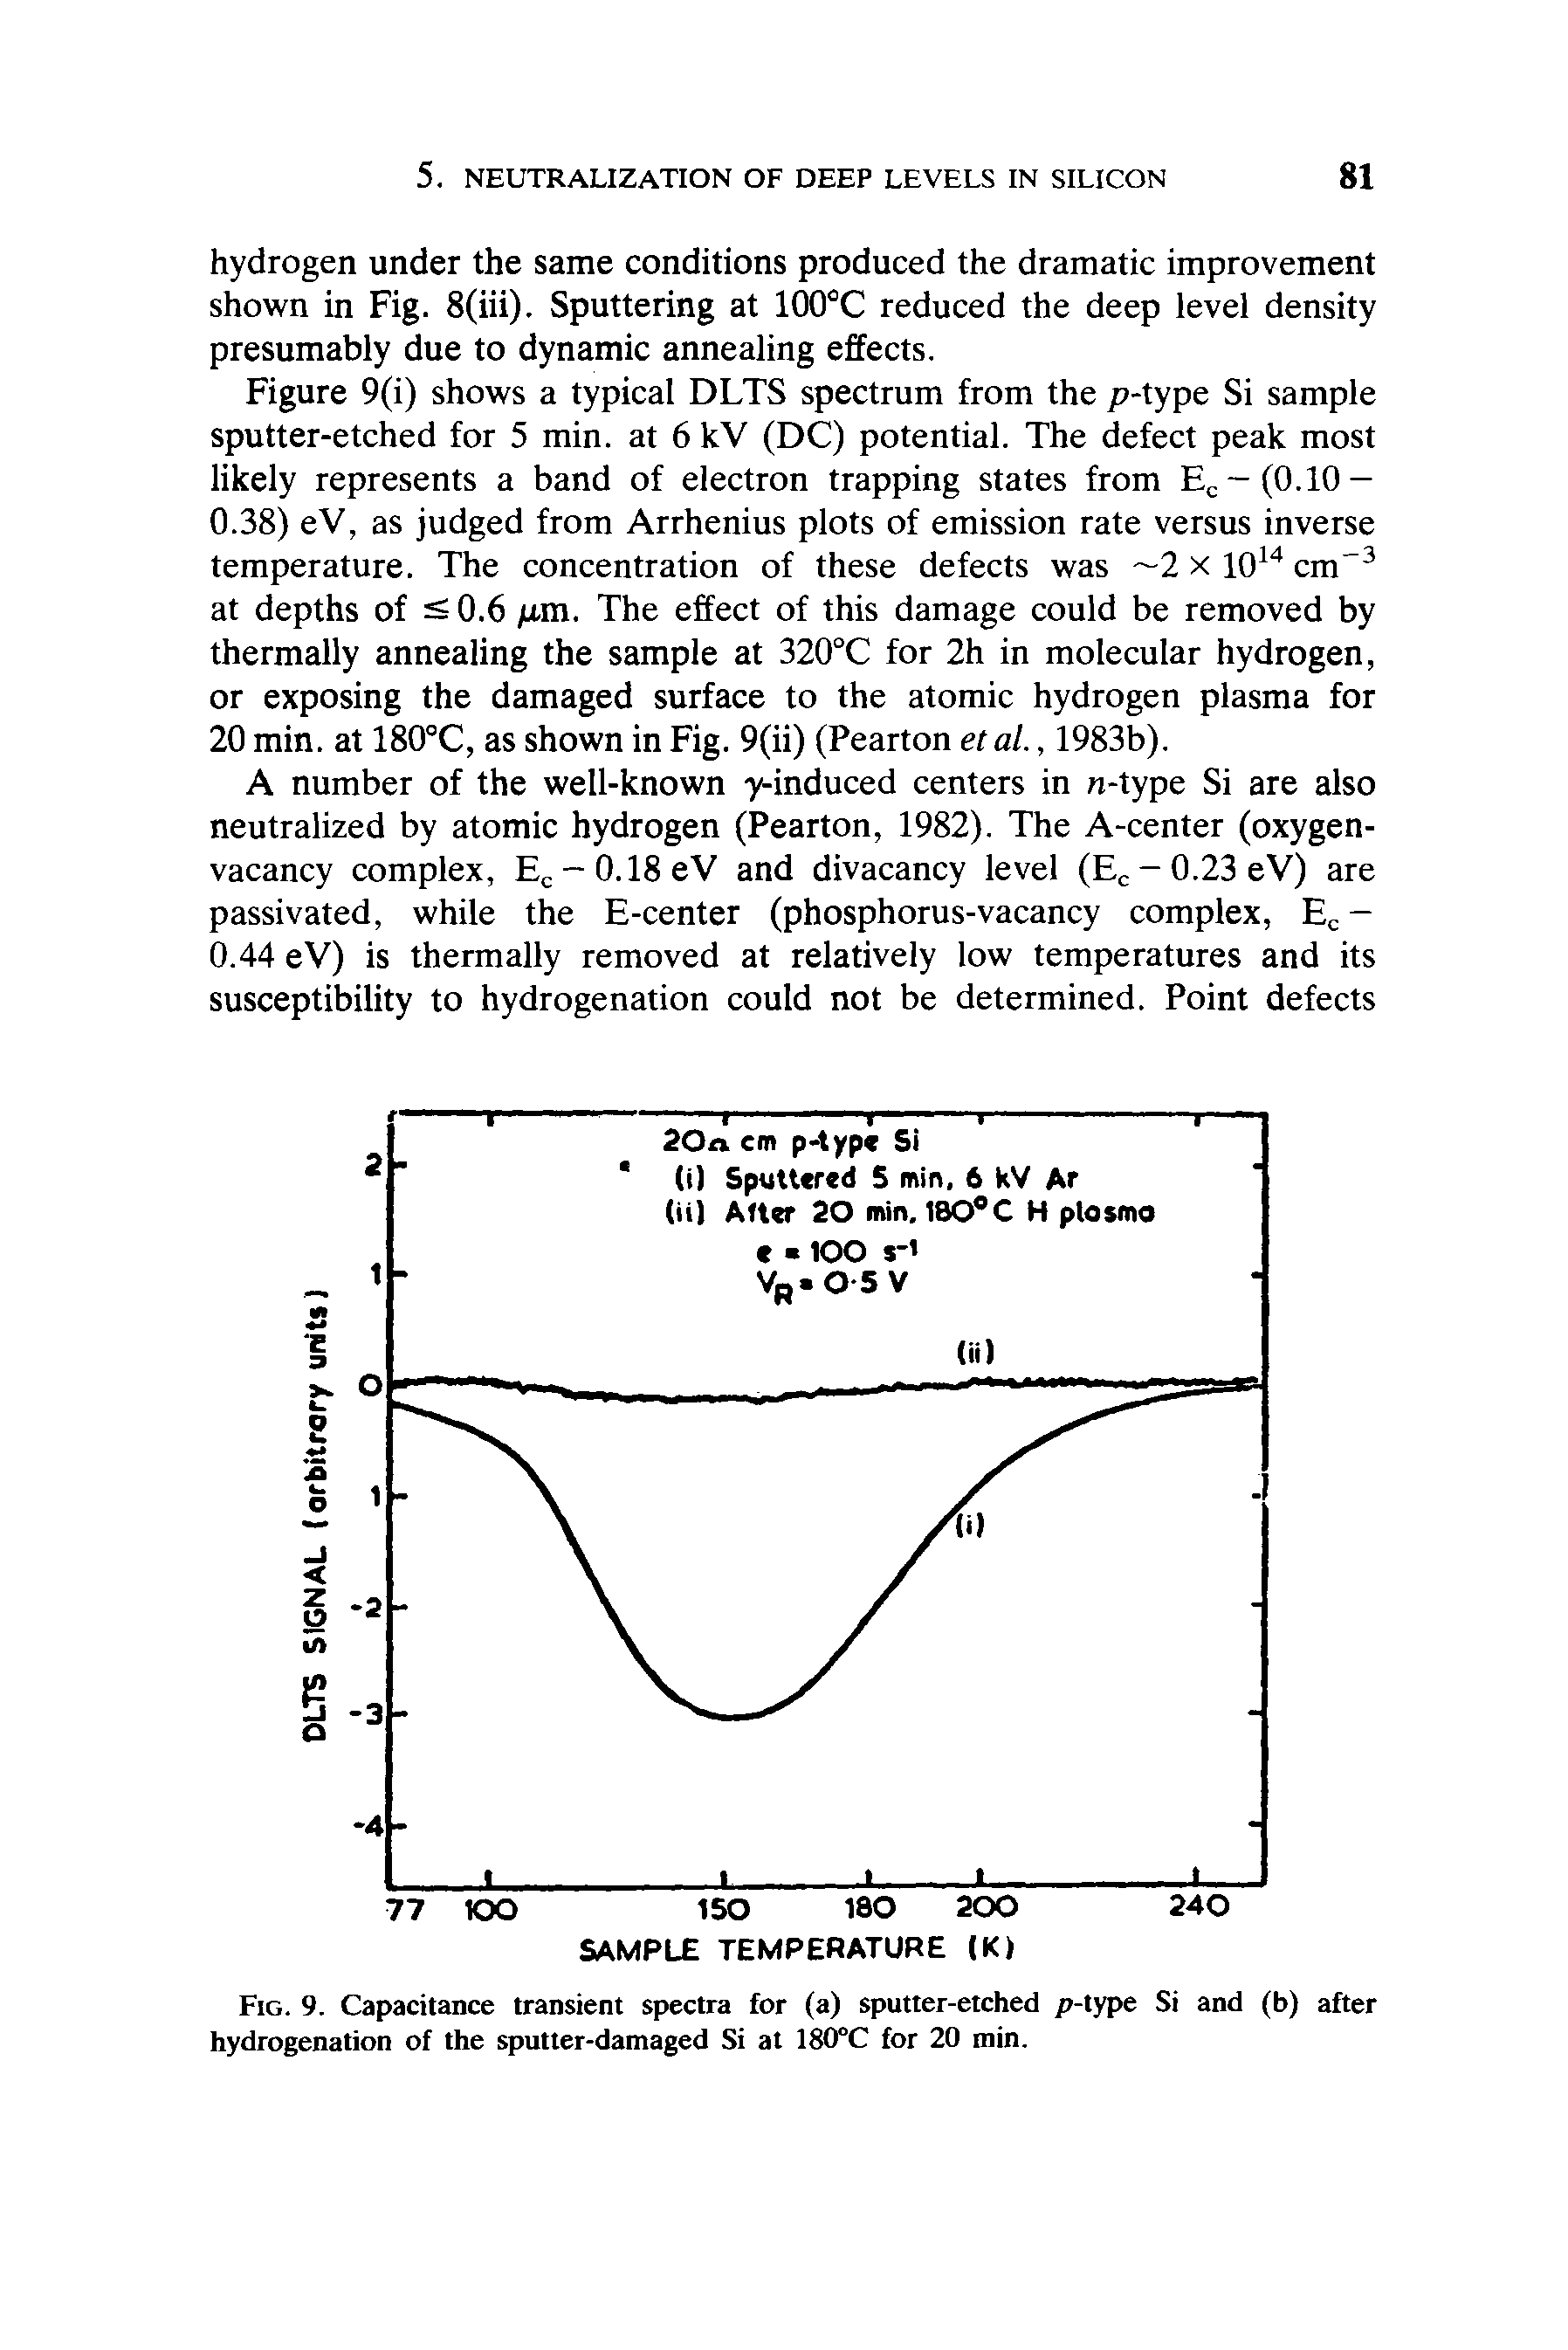 Fig. 9. Capacitance transient spectra for (a) sputter-etched p-type Si and (b) after hydrogenation of the sputter-damaged Si at 180°C for 20 min.